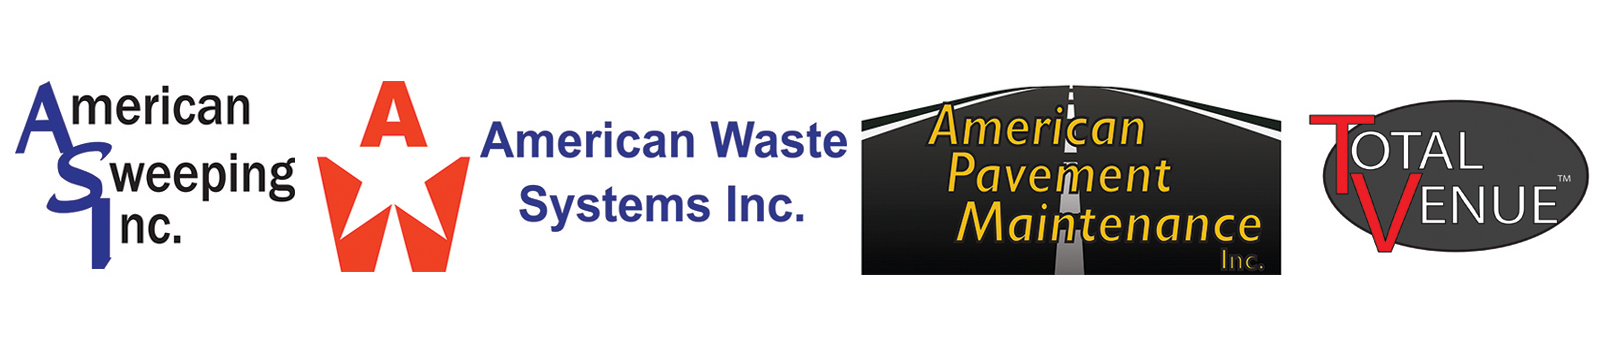 American Companies logo- American Waste Systems, American Sweeping, American Pavement Maintenance and total venue logo